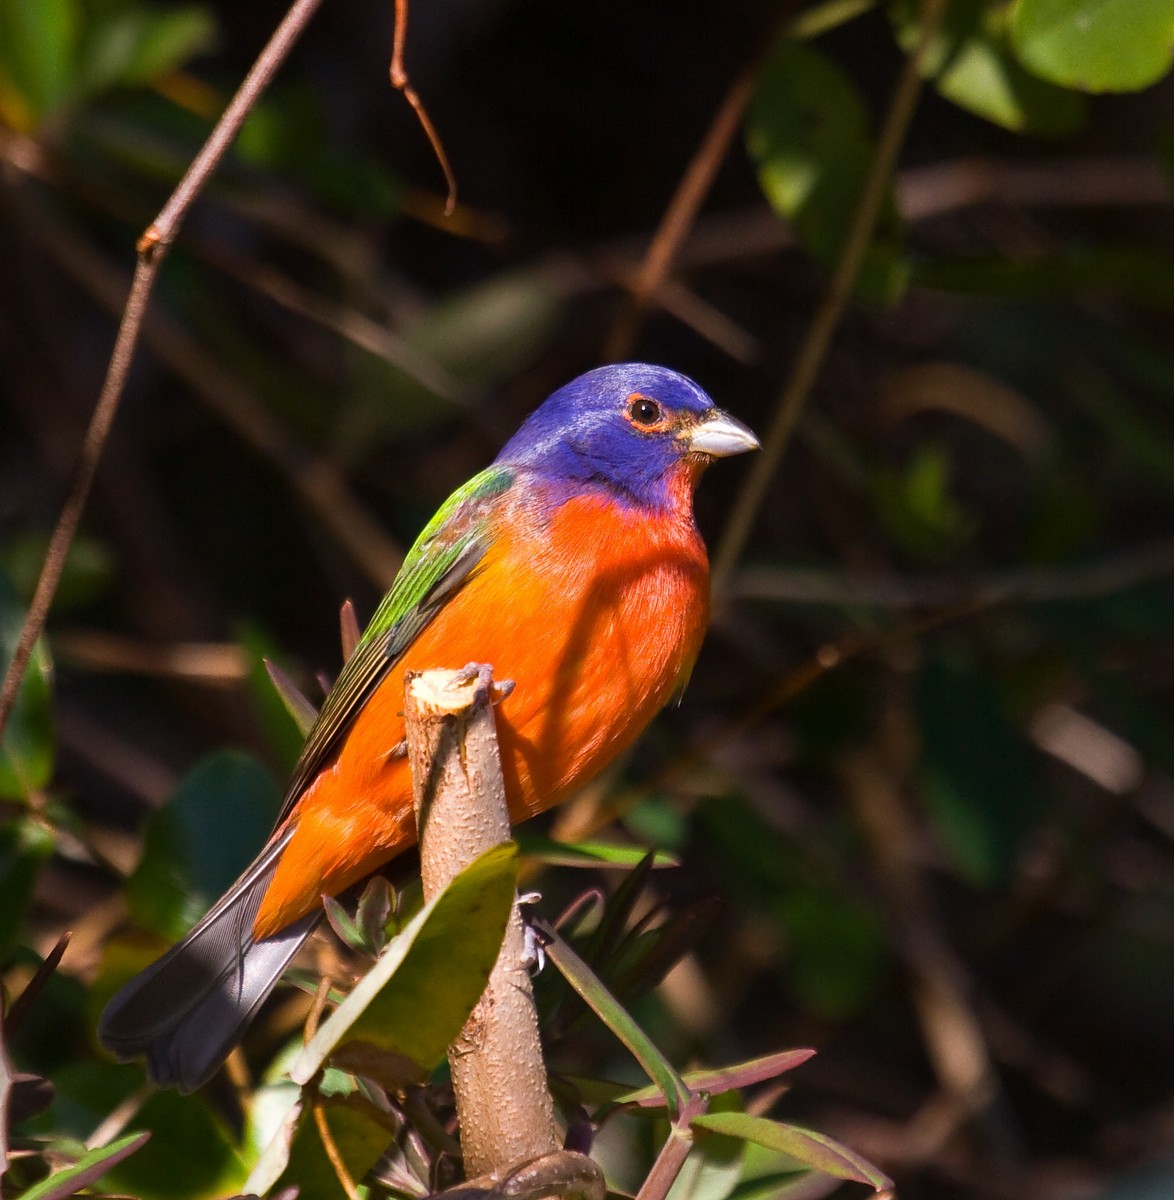 Painted Bunting standing on a twig. Leaves in the background.